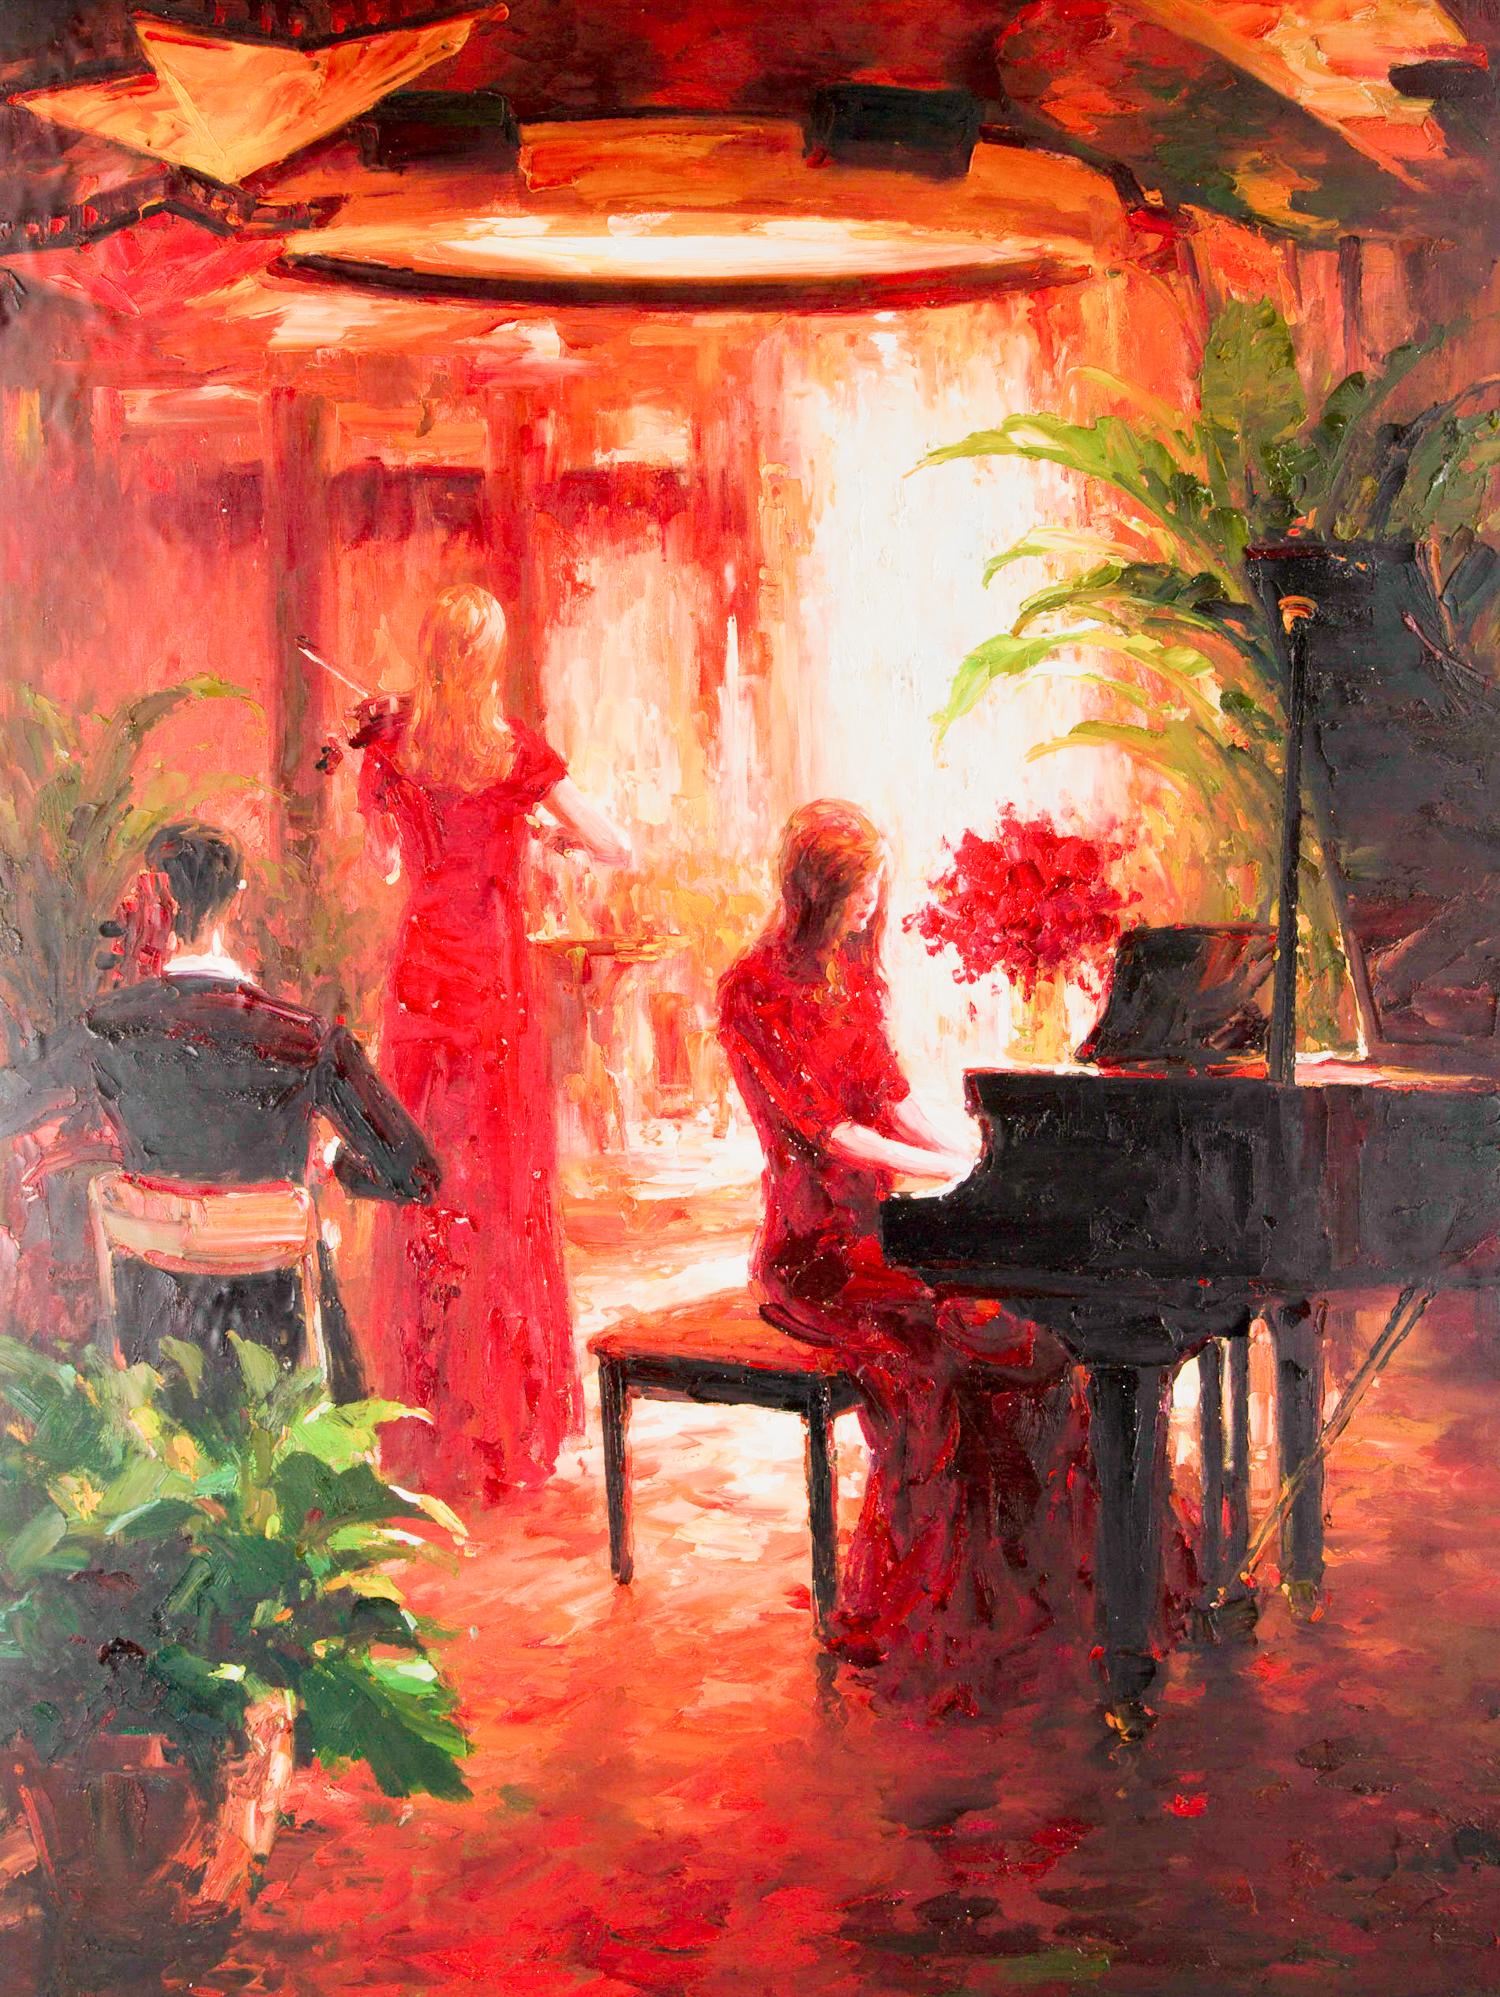 Title: Piano 1
Medium: Oil on canvas
Size: 47 1/4 x 35 3/4 inches
Frame: Framing options available!
Condition: The painting appears to be in excellent condition.

Year: 2000 Circa
Artist: Lin Hongdan
Signature: Unsigned
Signature Location: